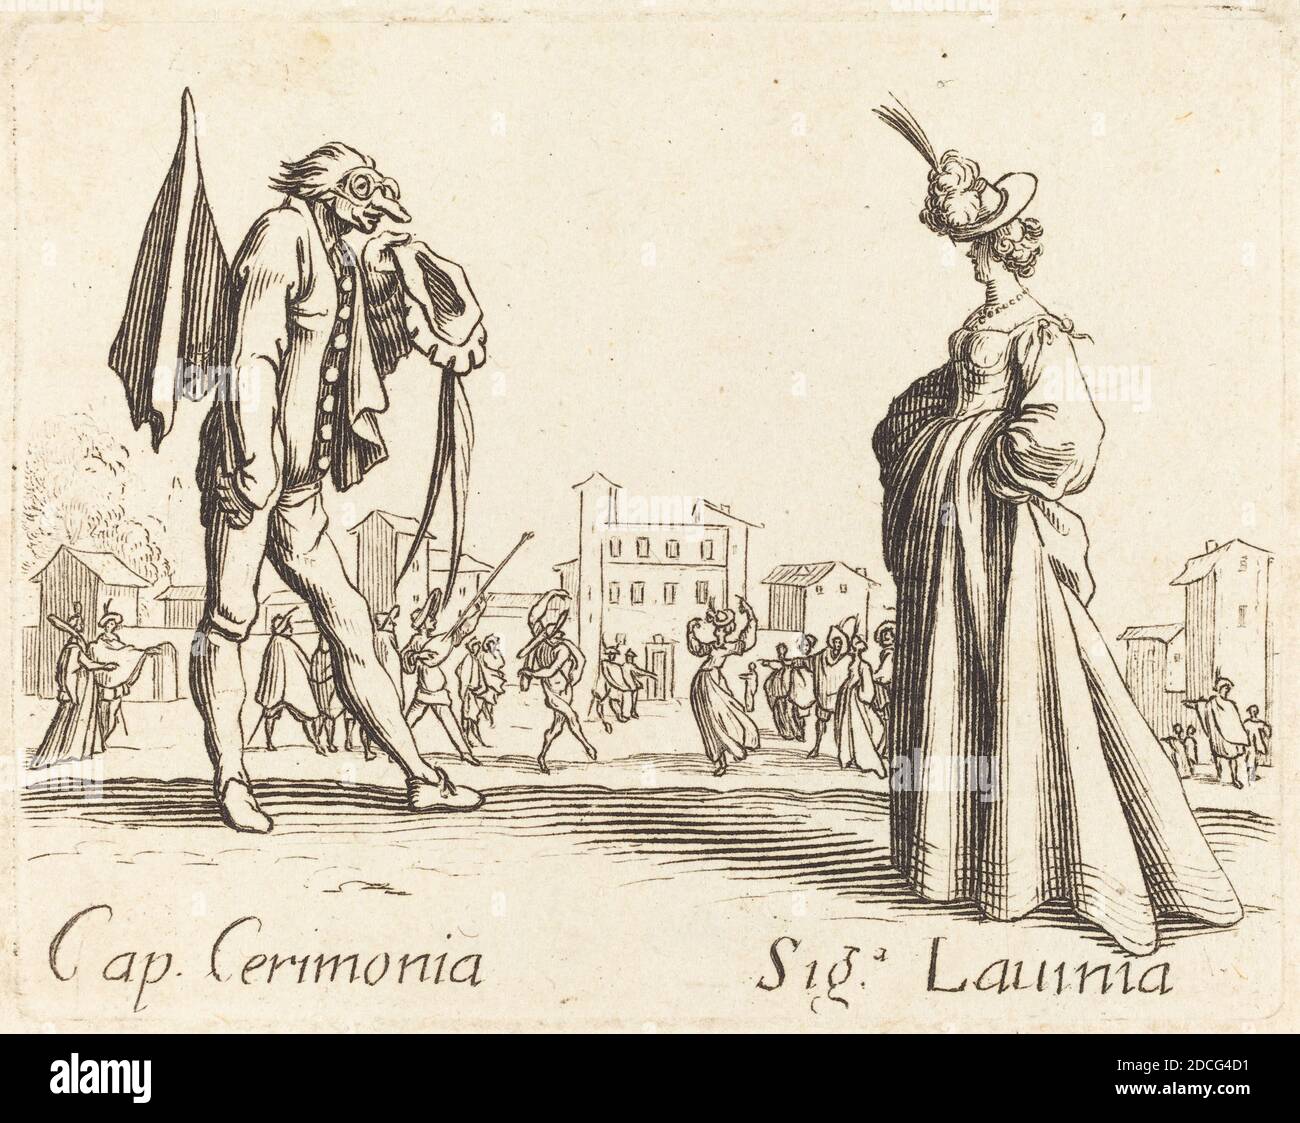 French 17th Century, (artist), Jacques Callot, (artist after), French, 1592 - 1635, Cap. Cerimonia and Siga. Lavinia, Balli di Sfessania (set of 17 copies: 1943.3.2182-2198), (series), etching Stock Photo